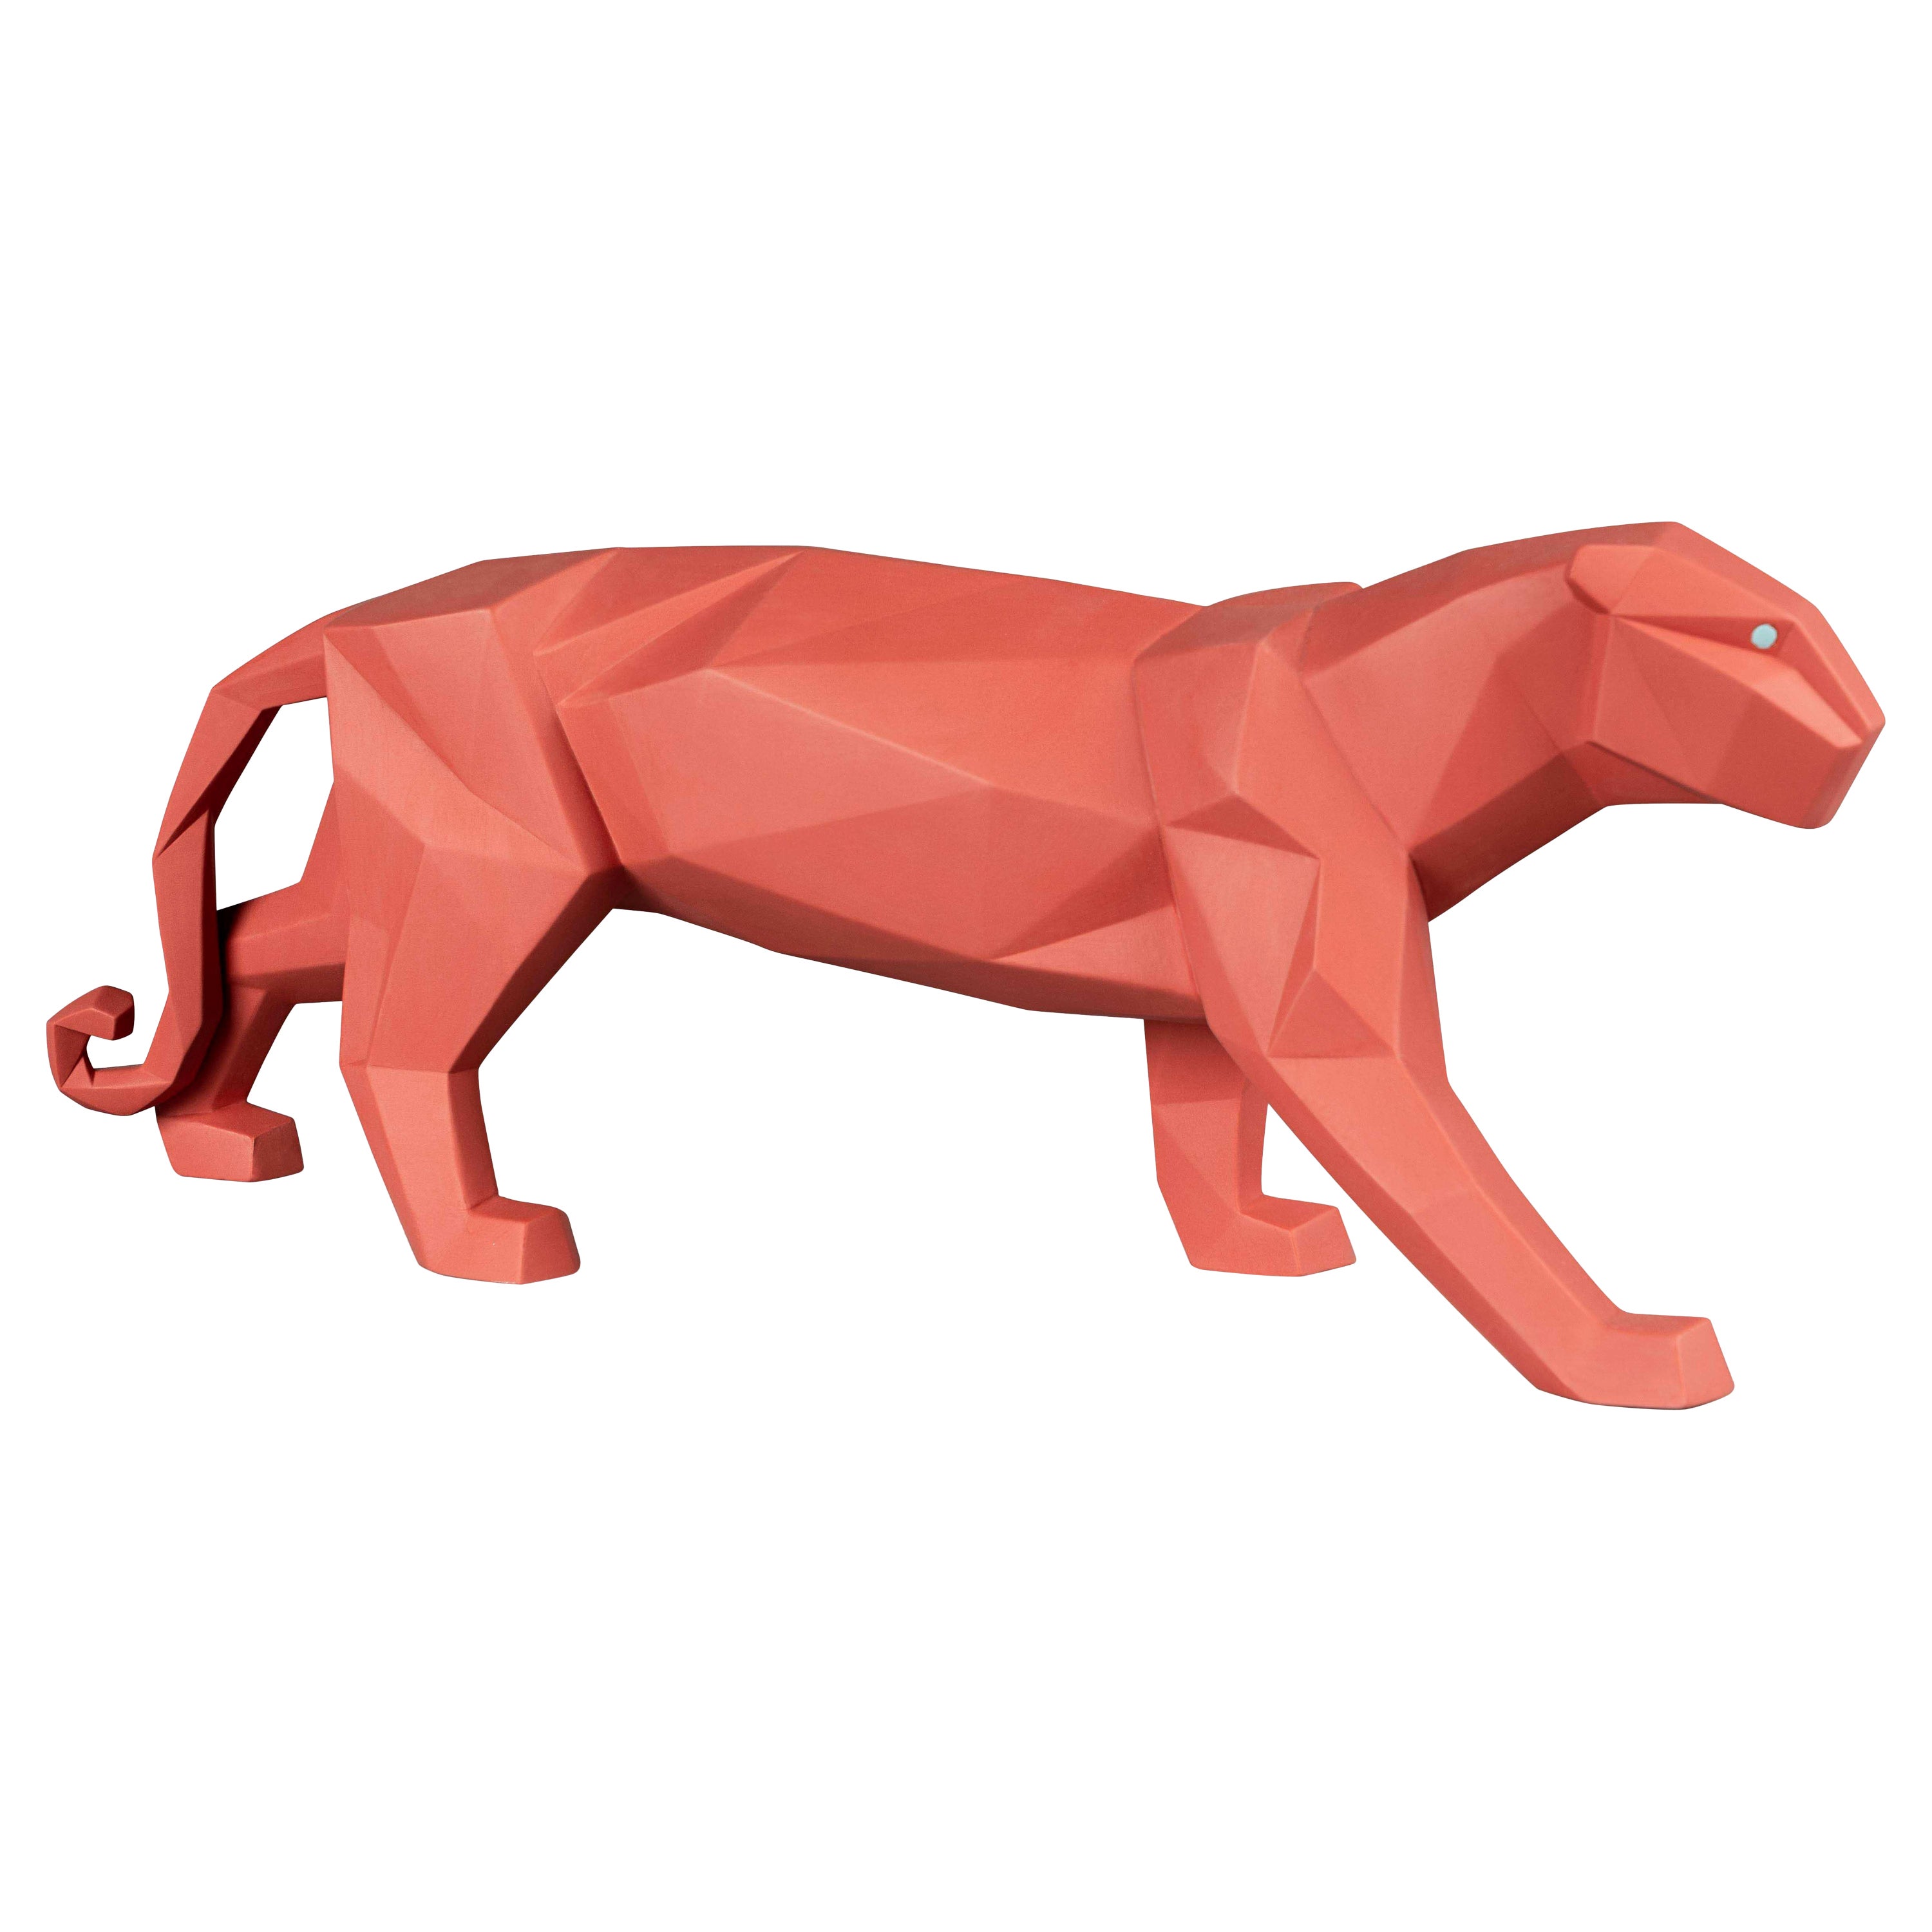 Panther Figurine. Coral matte For Sale